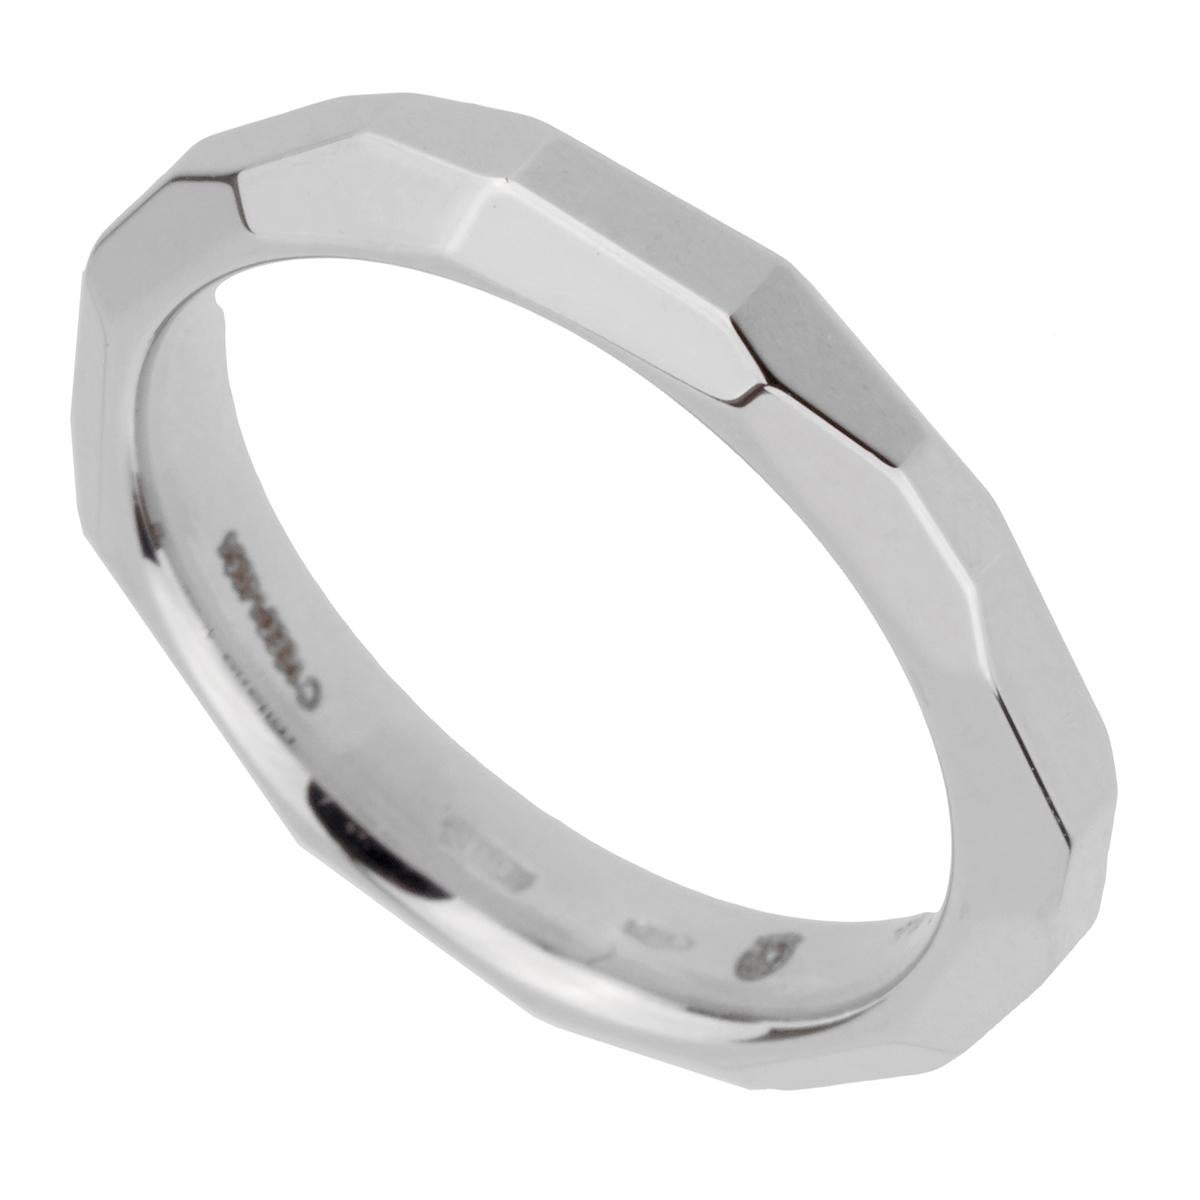 A chic white gold Pomellato band style ring crafted in 18k white gold, The ring measures a size 6.25 and can be resized.

Sku: 2379